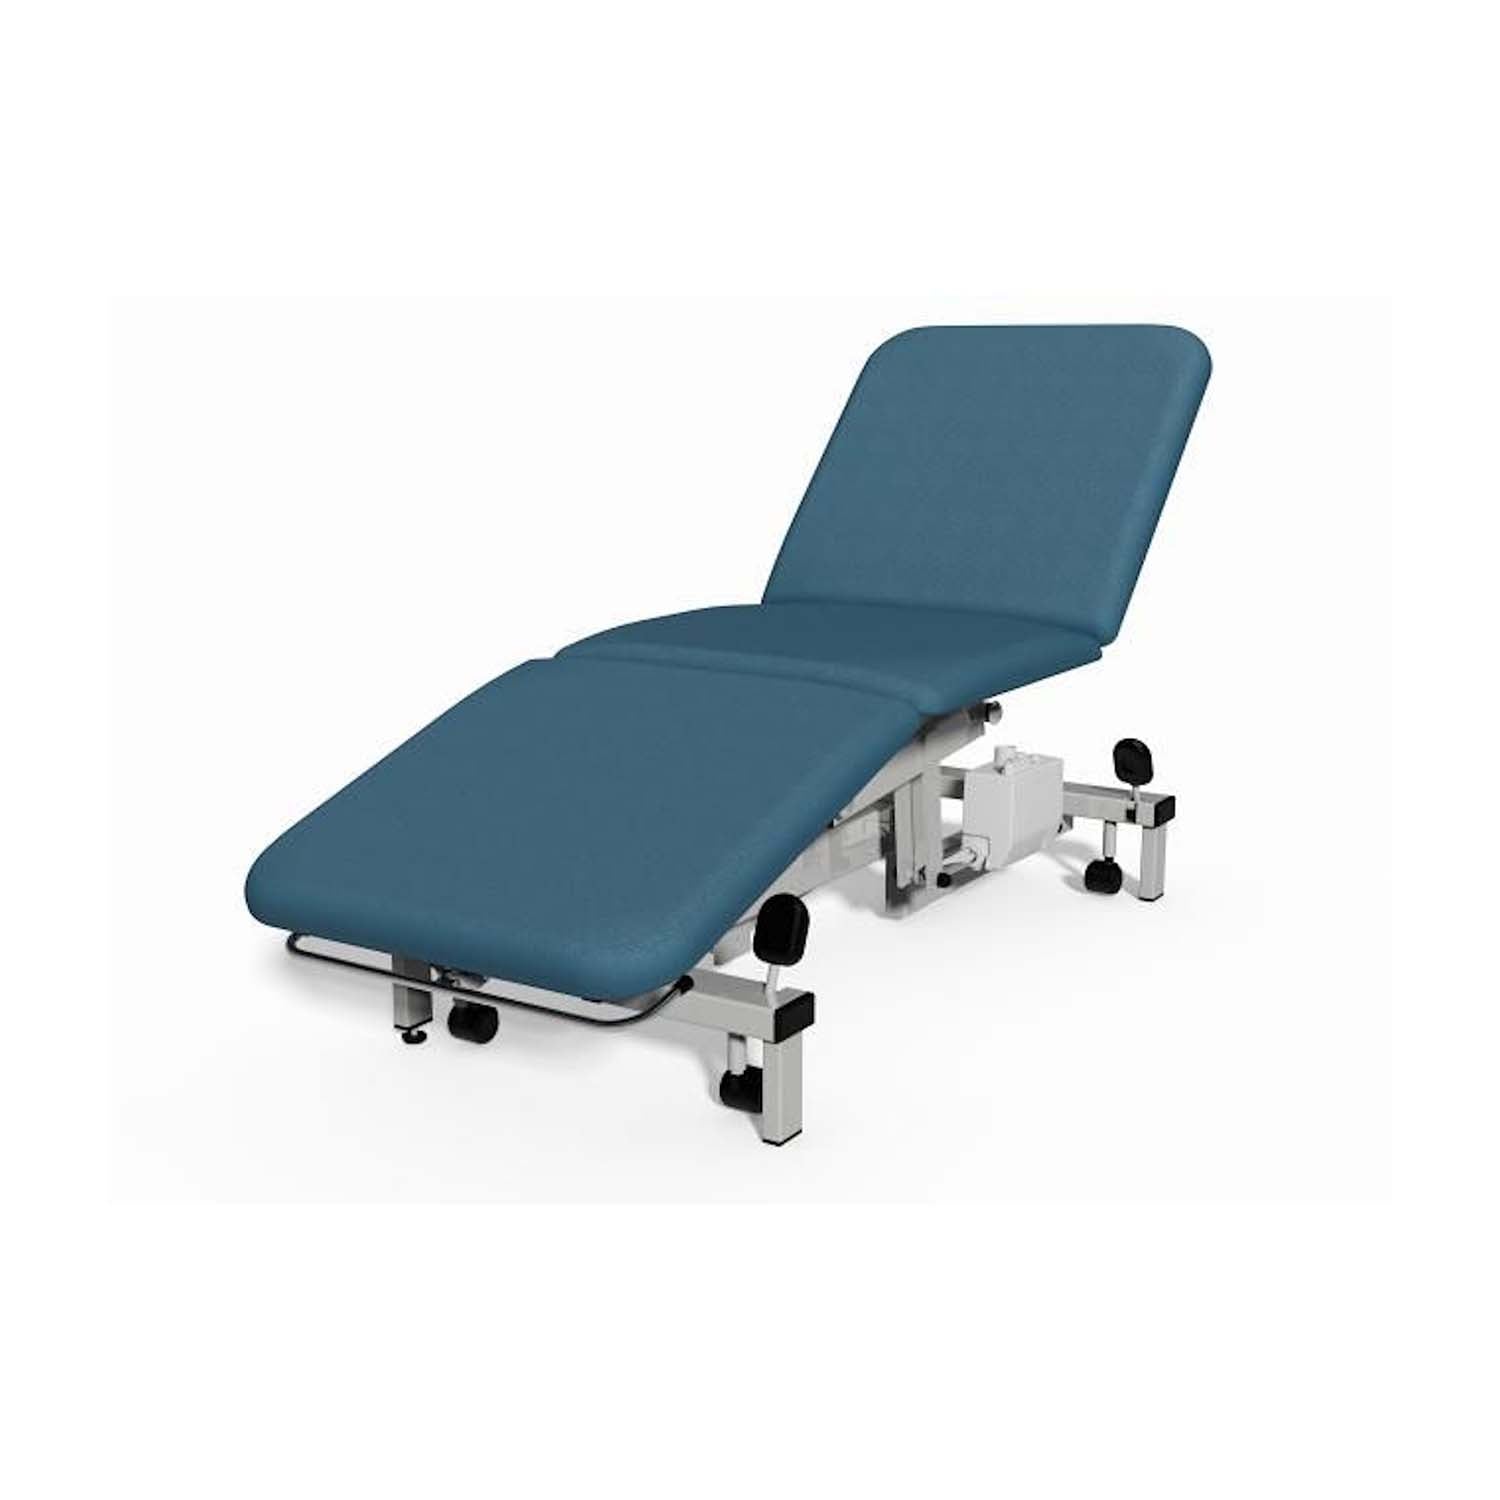 Plinth Model 503 3 Section Examination Couch | Hydraulic